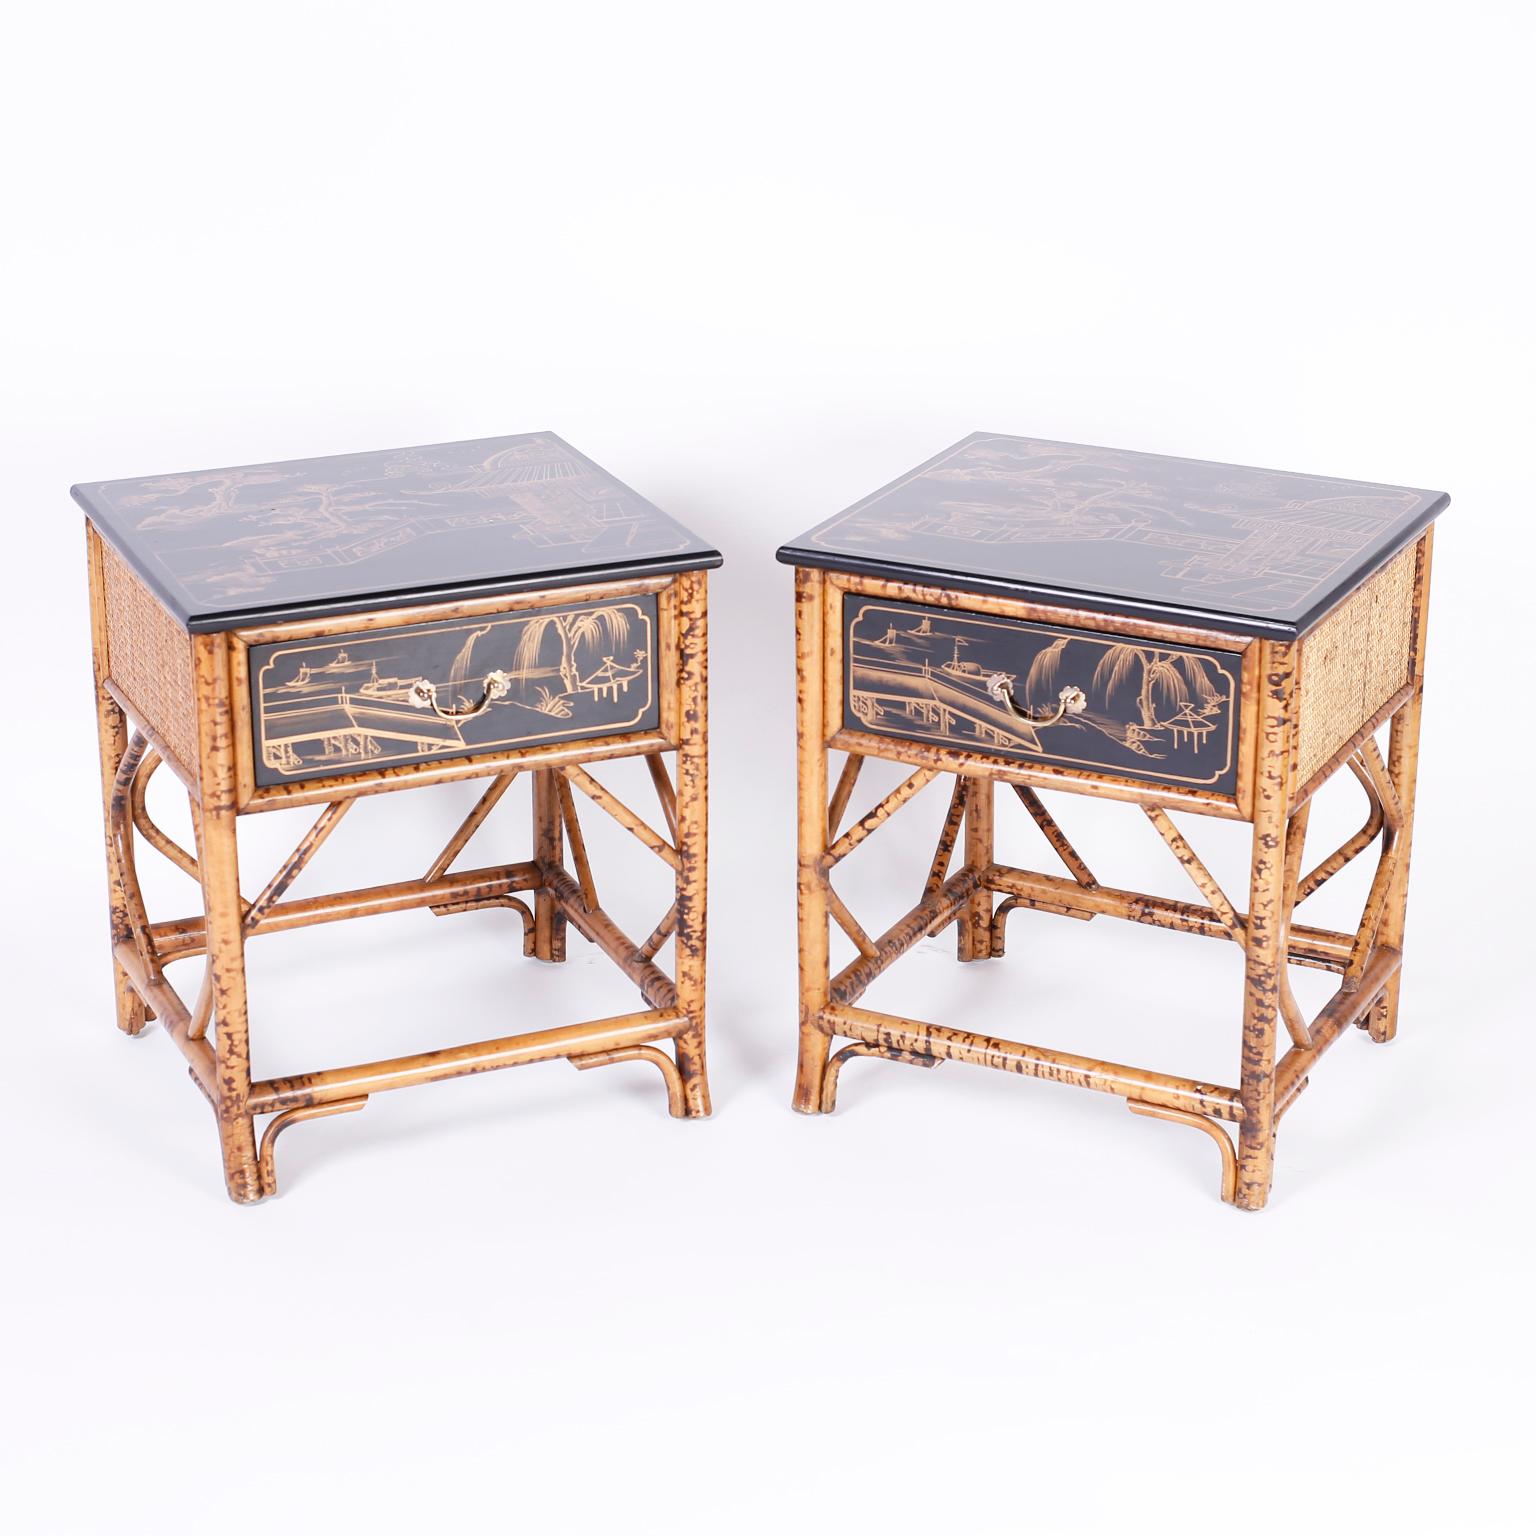 Pair of midcentury one drawer nightstands or end tables with burnt bamboo frames, grass cloth panels, black lacquer tops, and drawer fronts hand painted with scenes of architecture and trees.